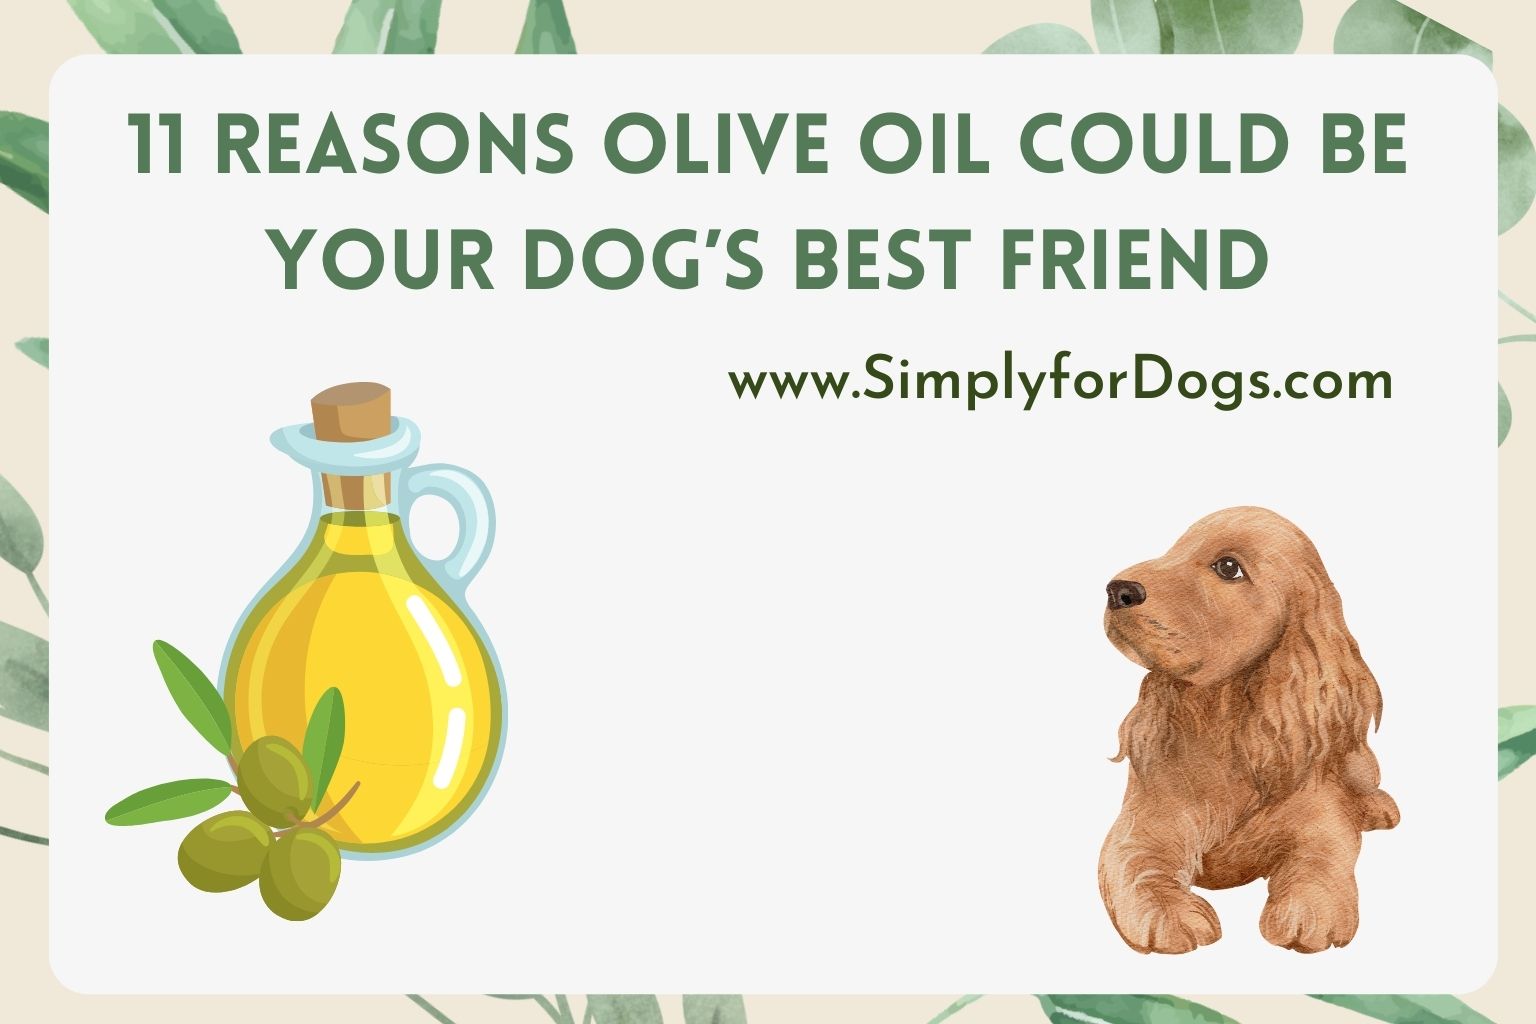 11 Reasons Olive Oil Could Be Your Dog’s Best Friend